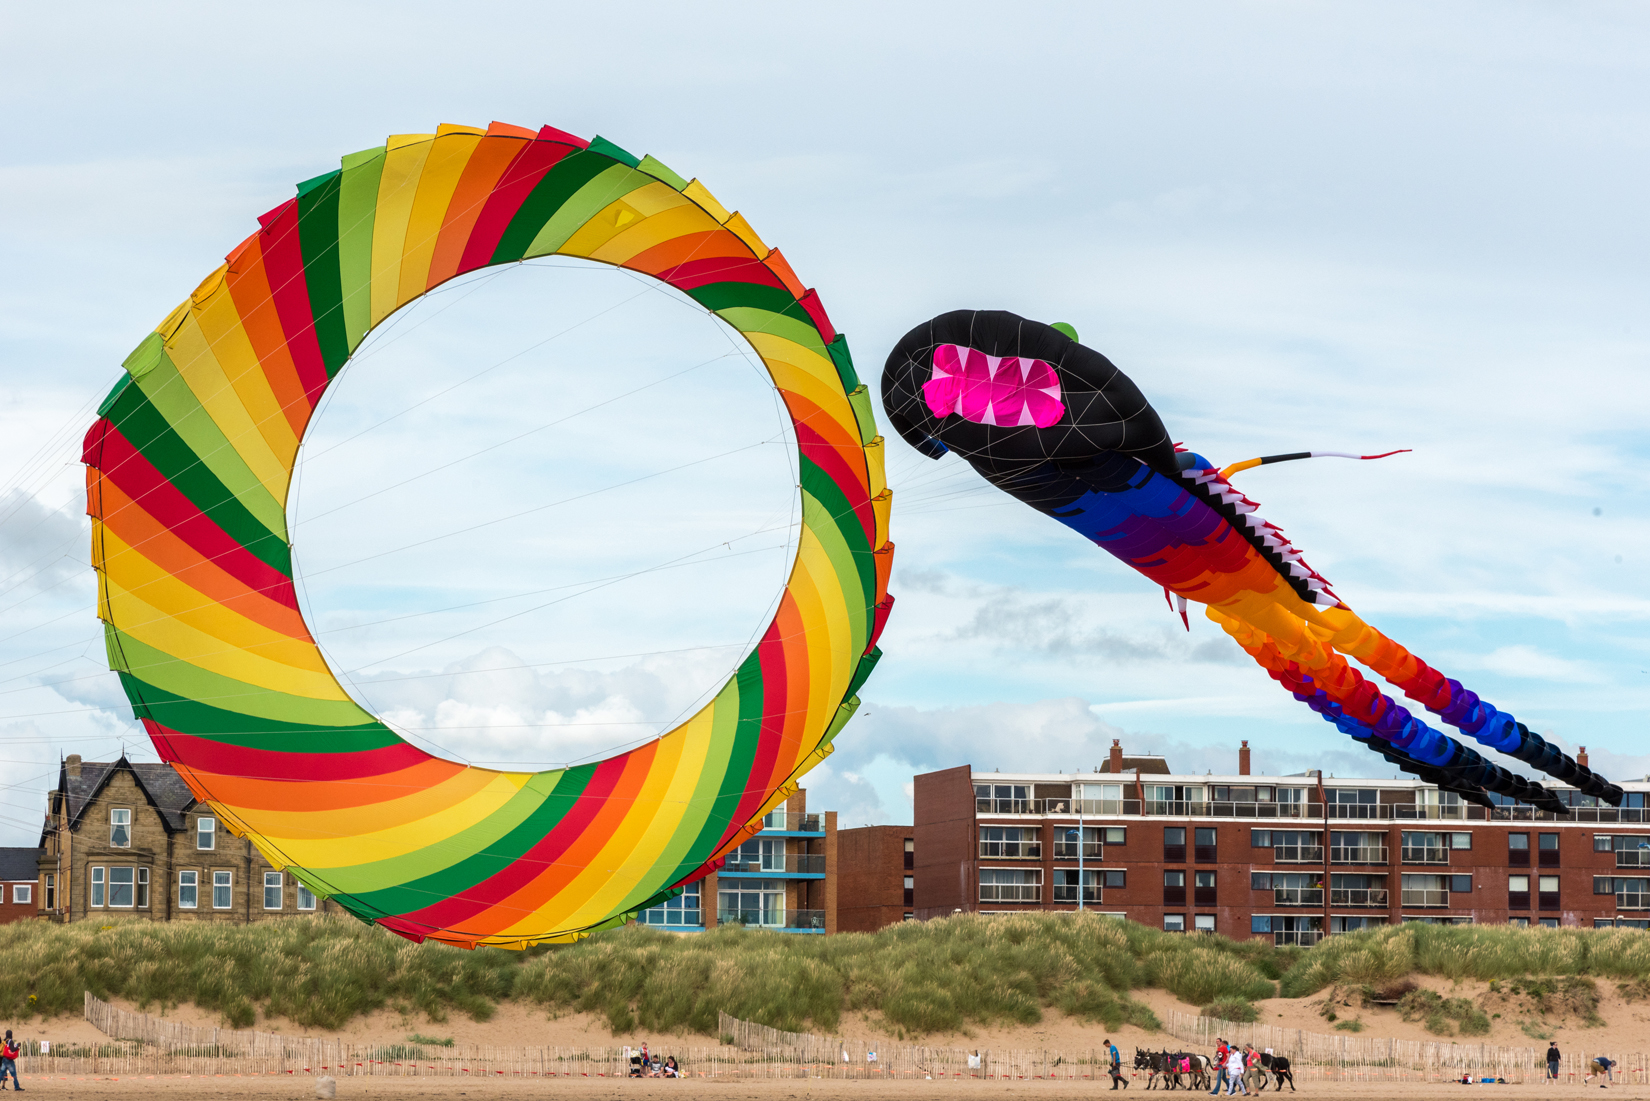 A manta-ray dancing on the wind with a simple but colourful circular kite.